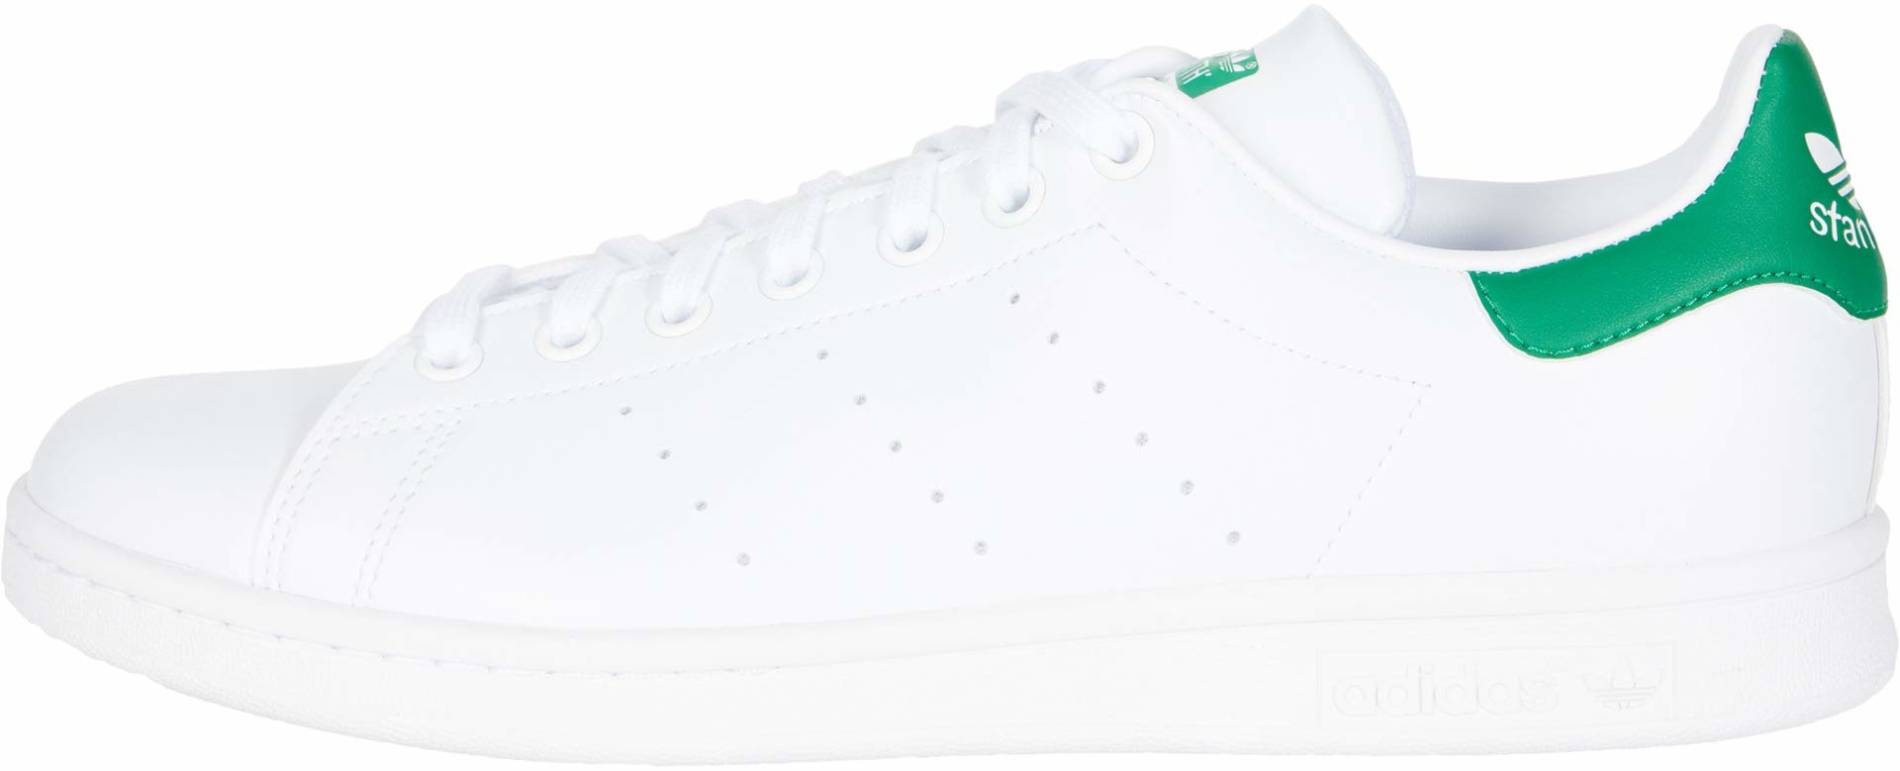 Adidas Stan Smith sneakers in 20 colors (only $40) | RunRepeat